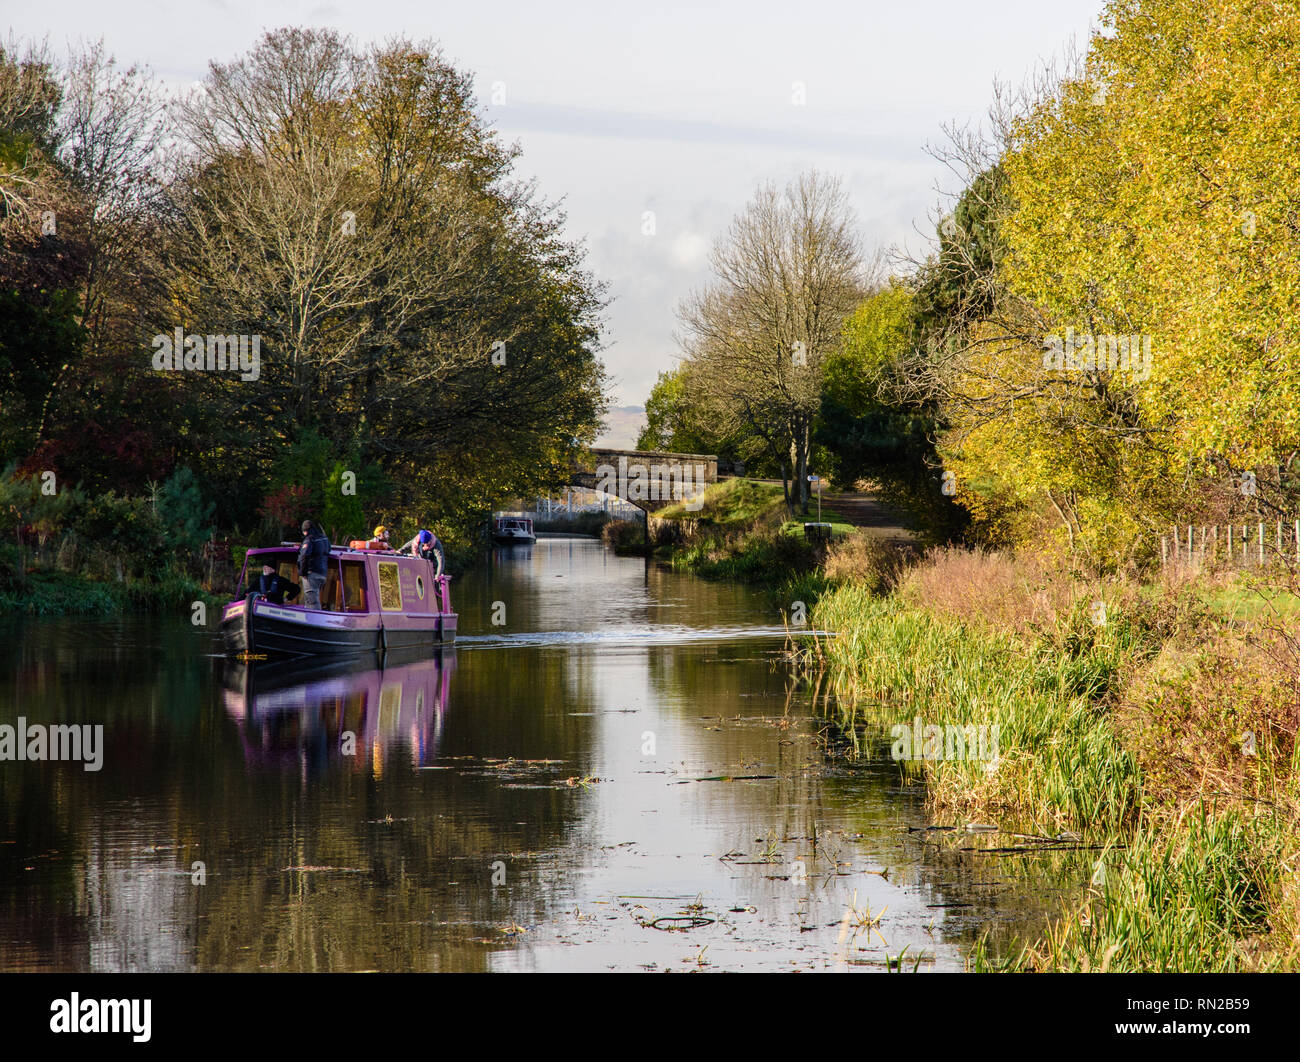 Falkirk, Scotland, UK - November 2, 2018: A traditional canal boat is sailed along the Union Canal between trees displaying autumn colours at Falkirk  Stock Photo